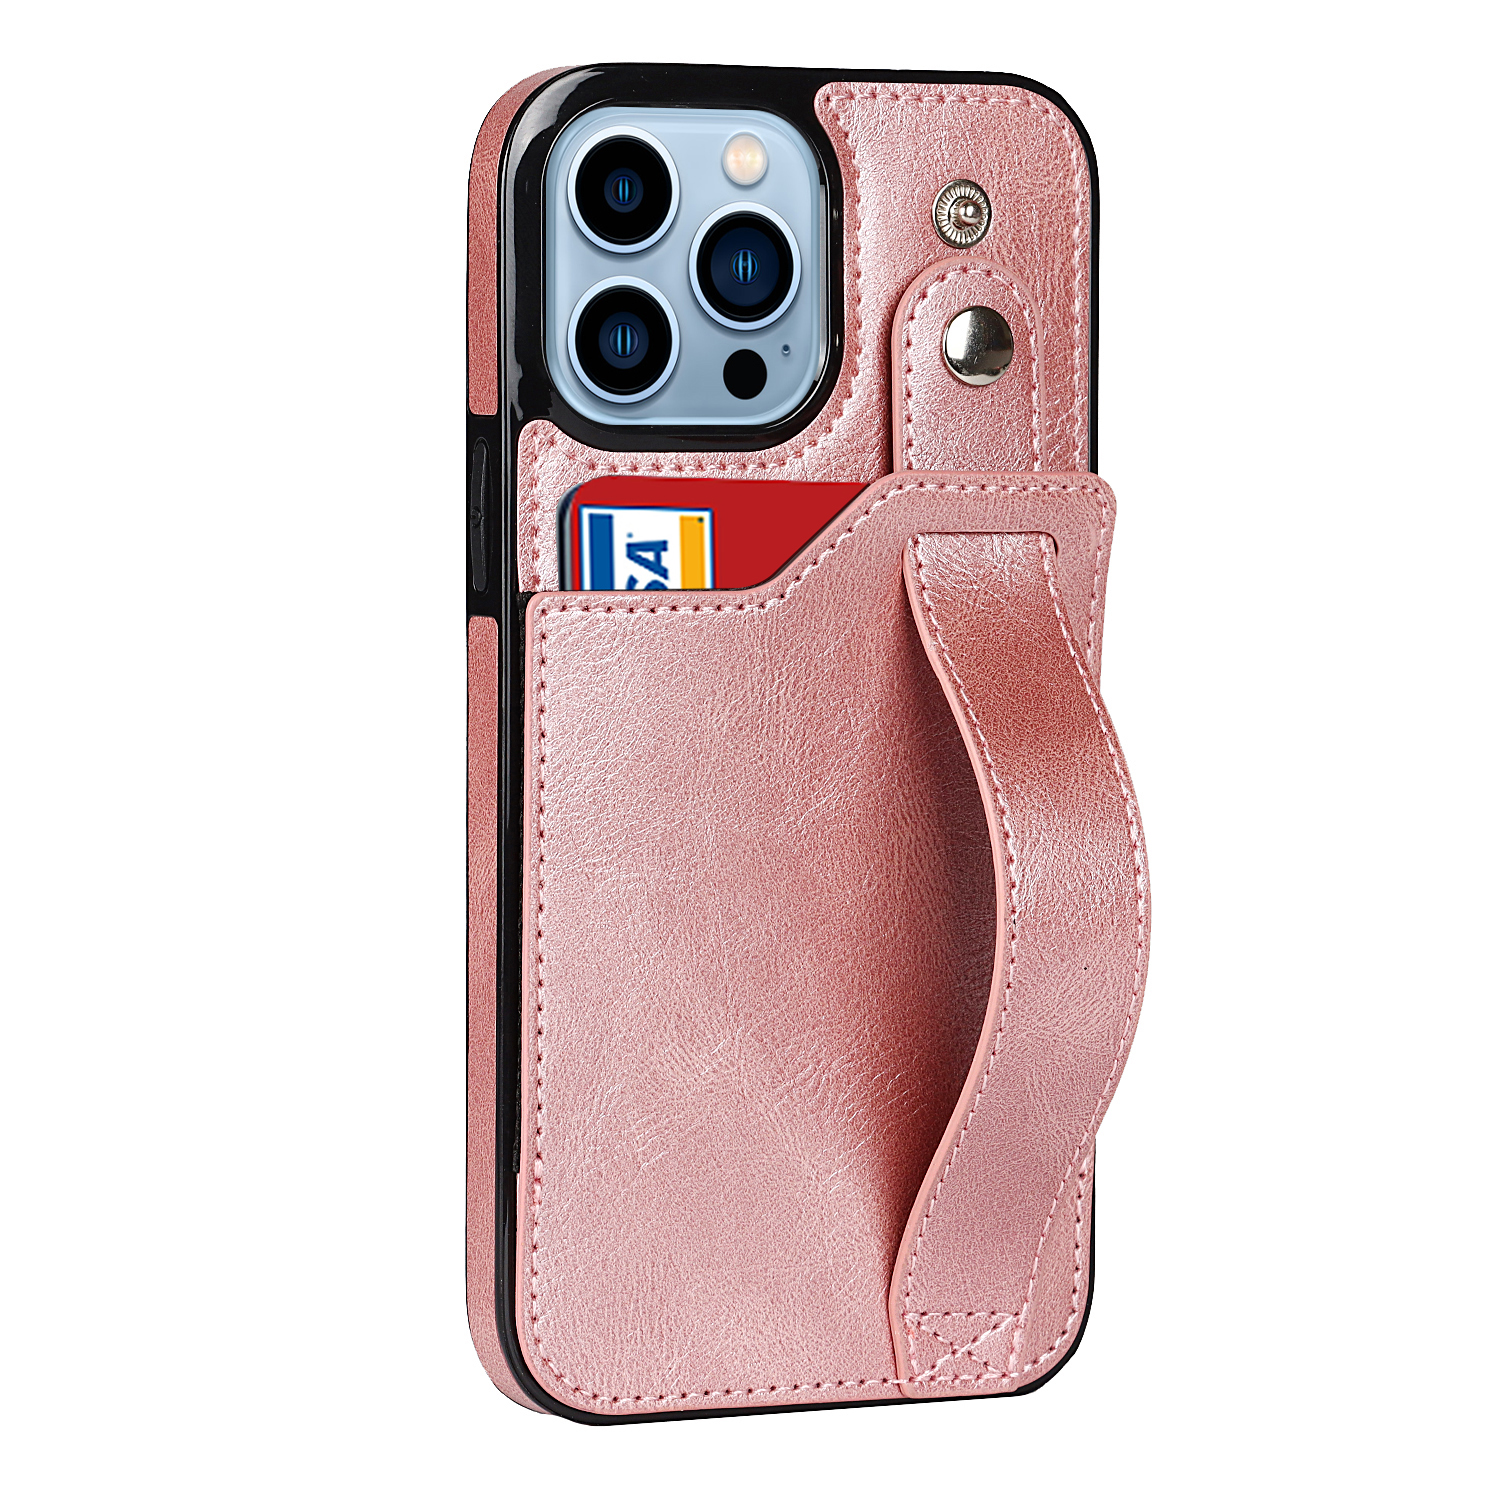 Samsung Galaxy A52s Back Cover Hoesje met Handvat - leer- Handvat - Backcover - Samsung Galaxy A52s - Roze